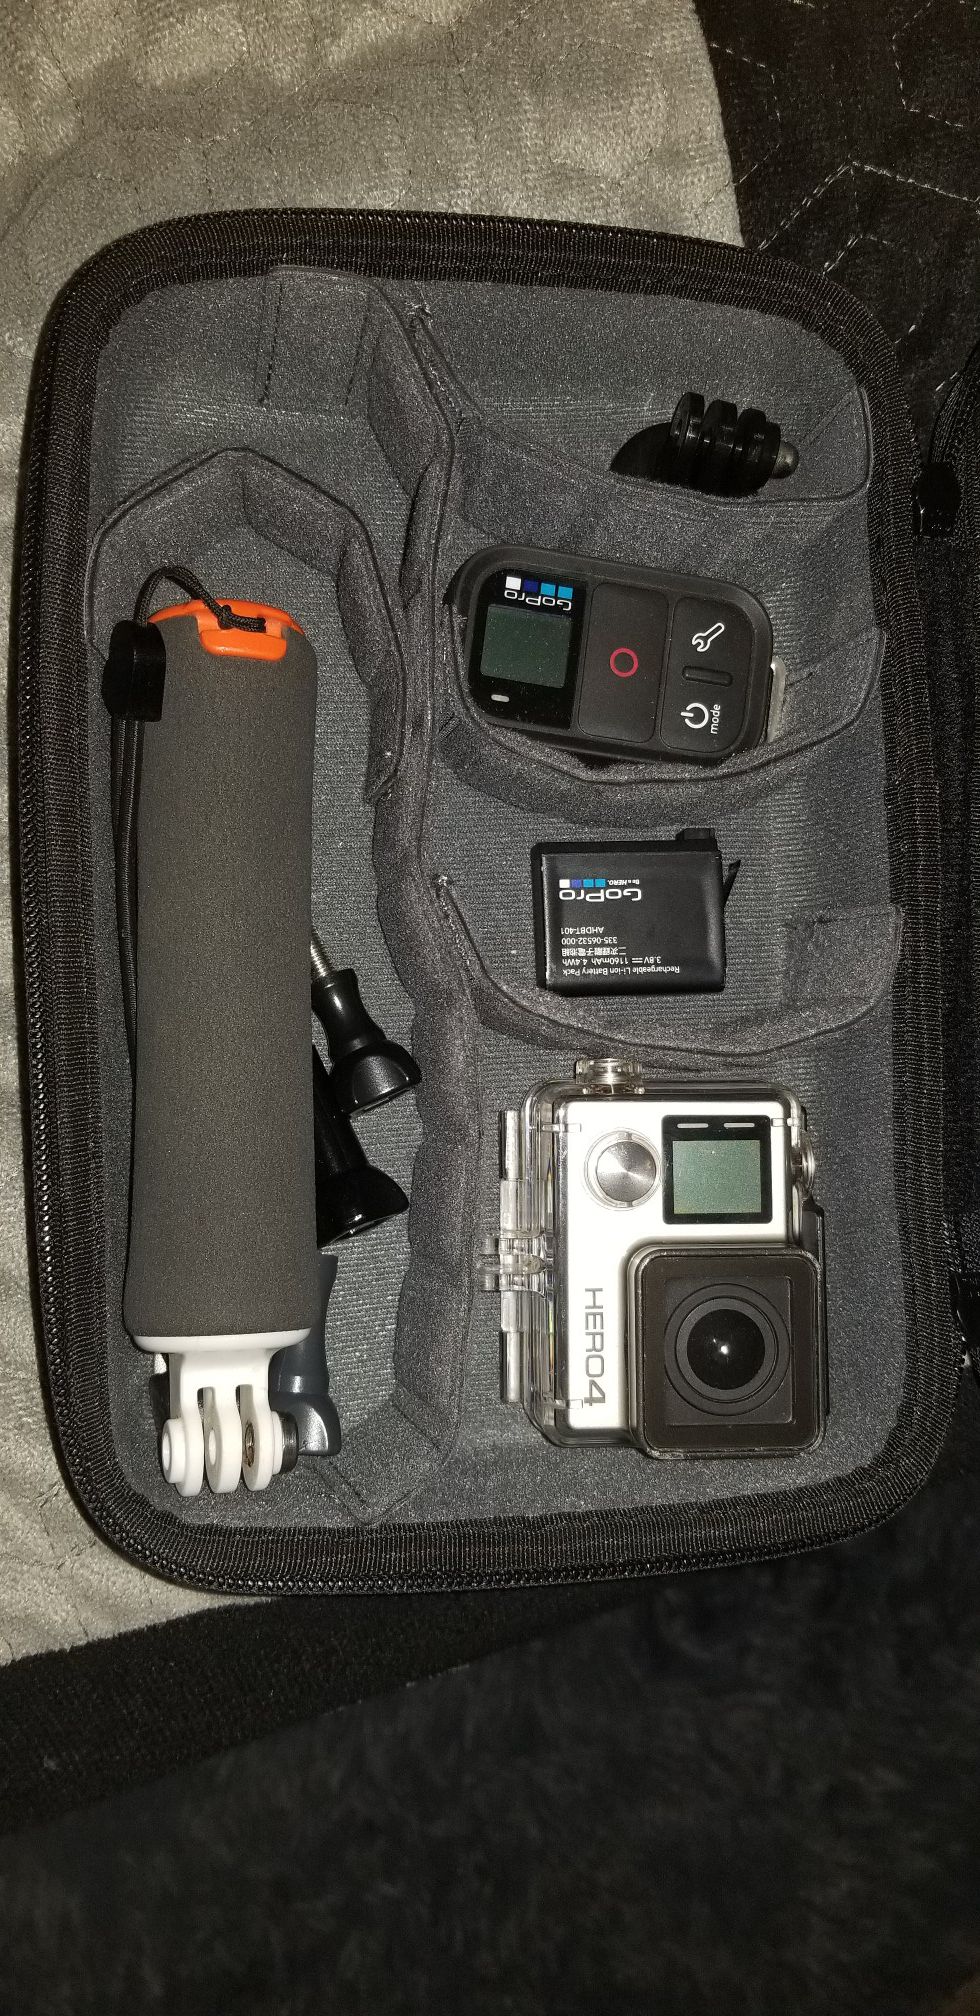 Gopro hero 4 silver edition and hp envy laptop